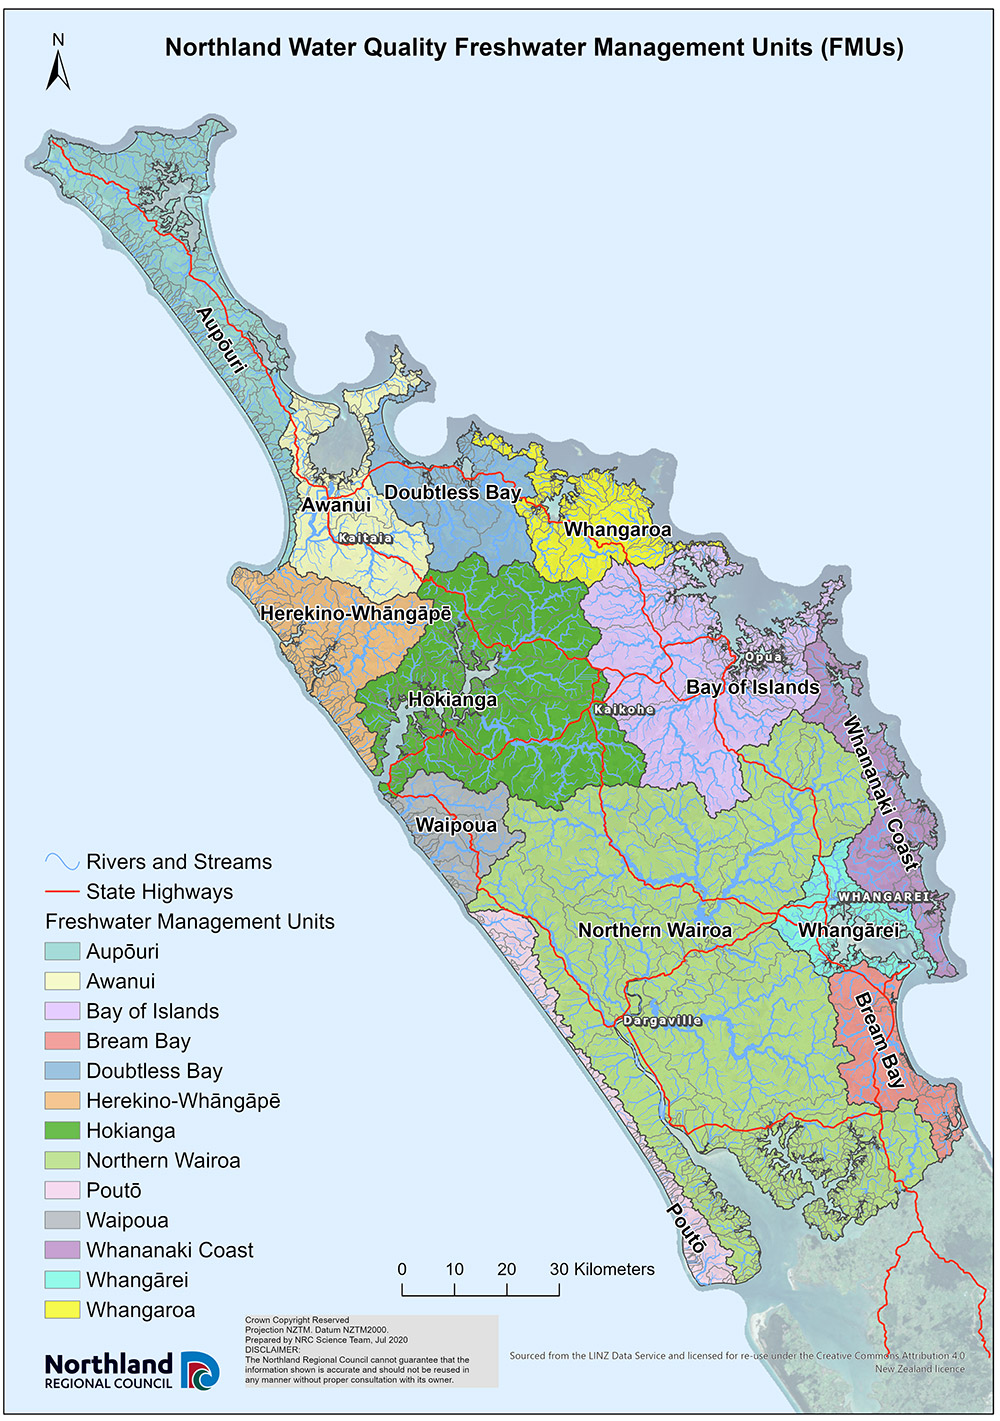 Map of Northland Water Quality Freshwater Management Units (FMUs).